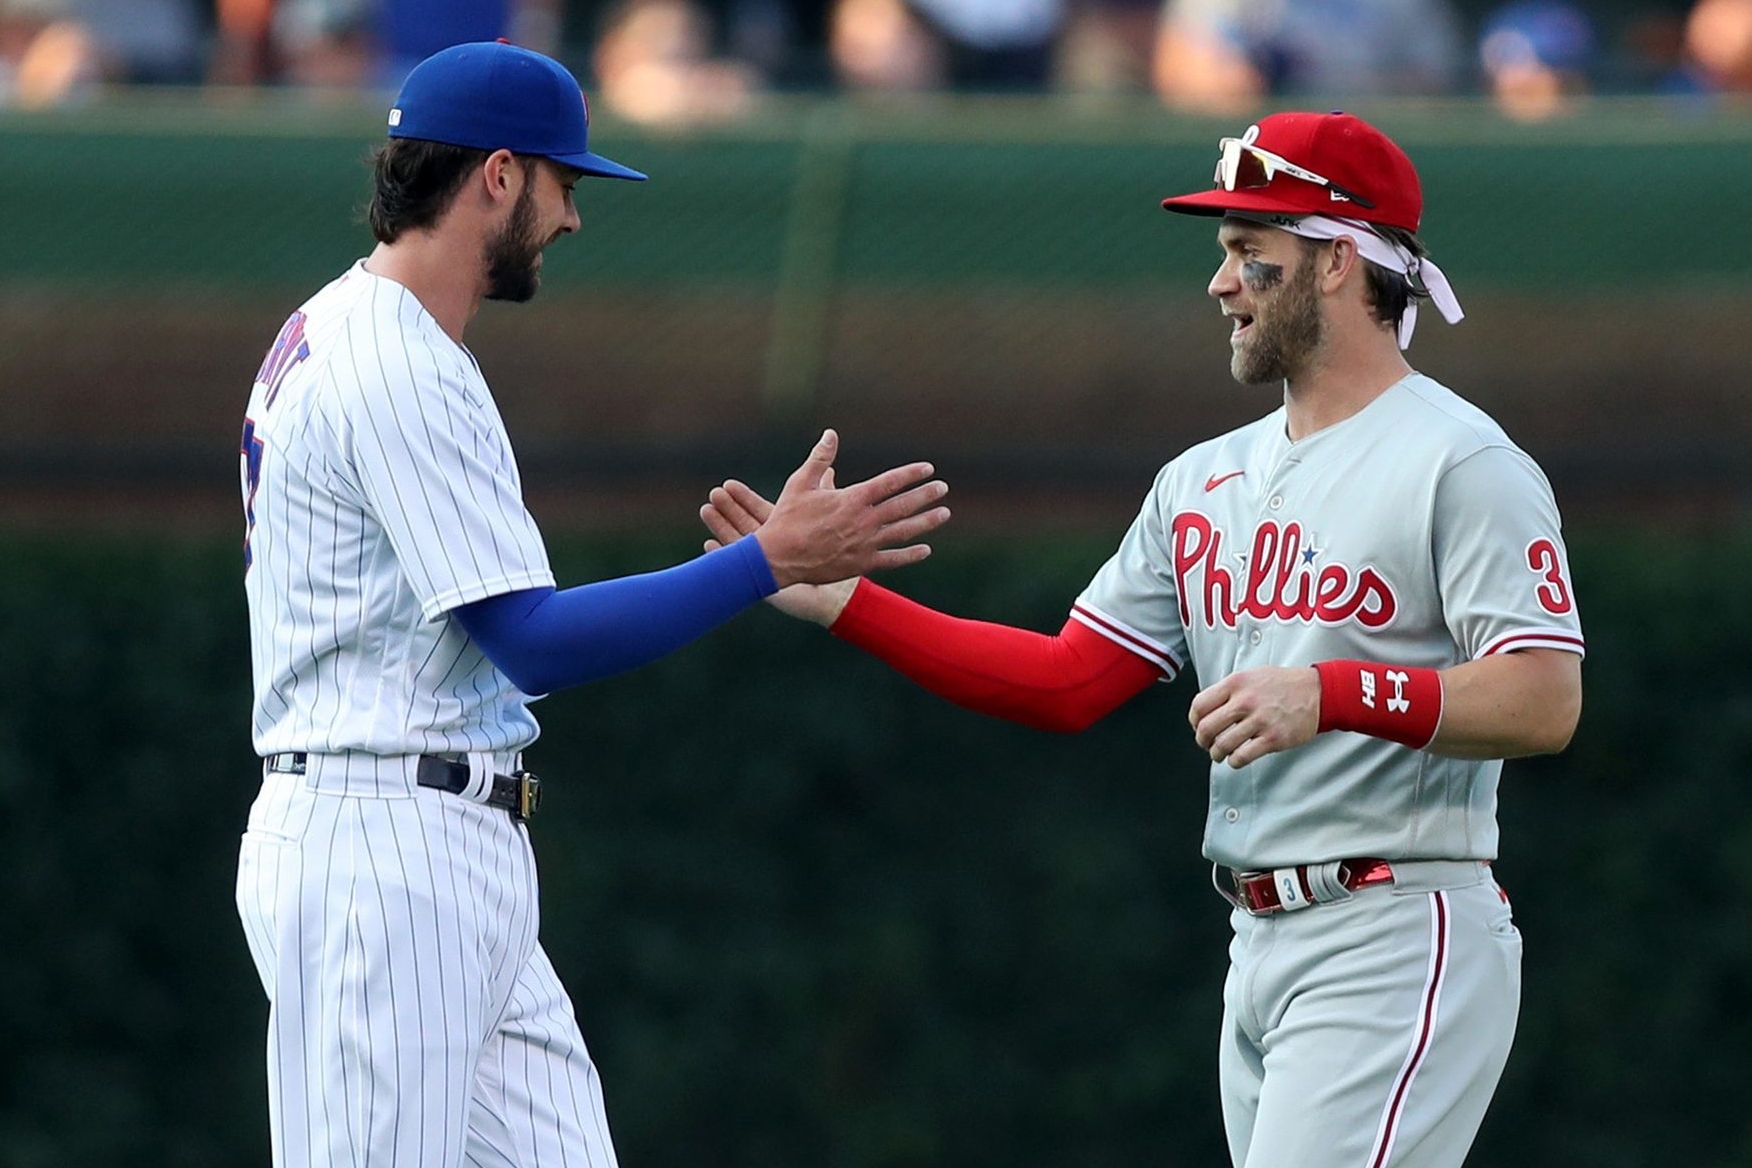 MLB's luxury tax negotiation could play big role in Phillies' plans for 2022